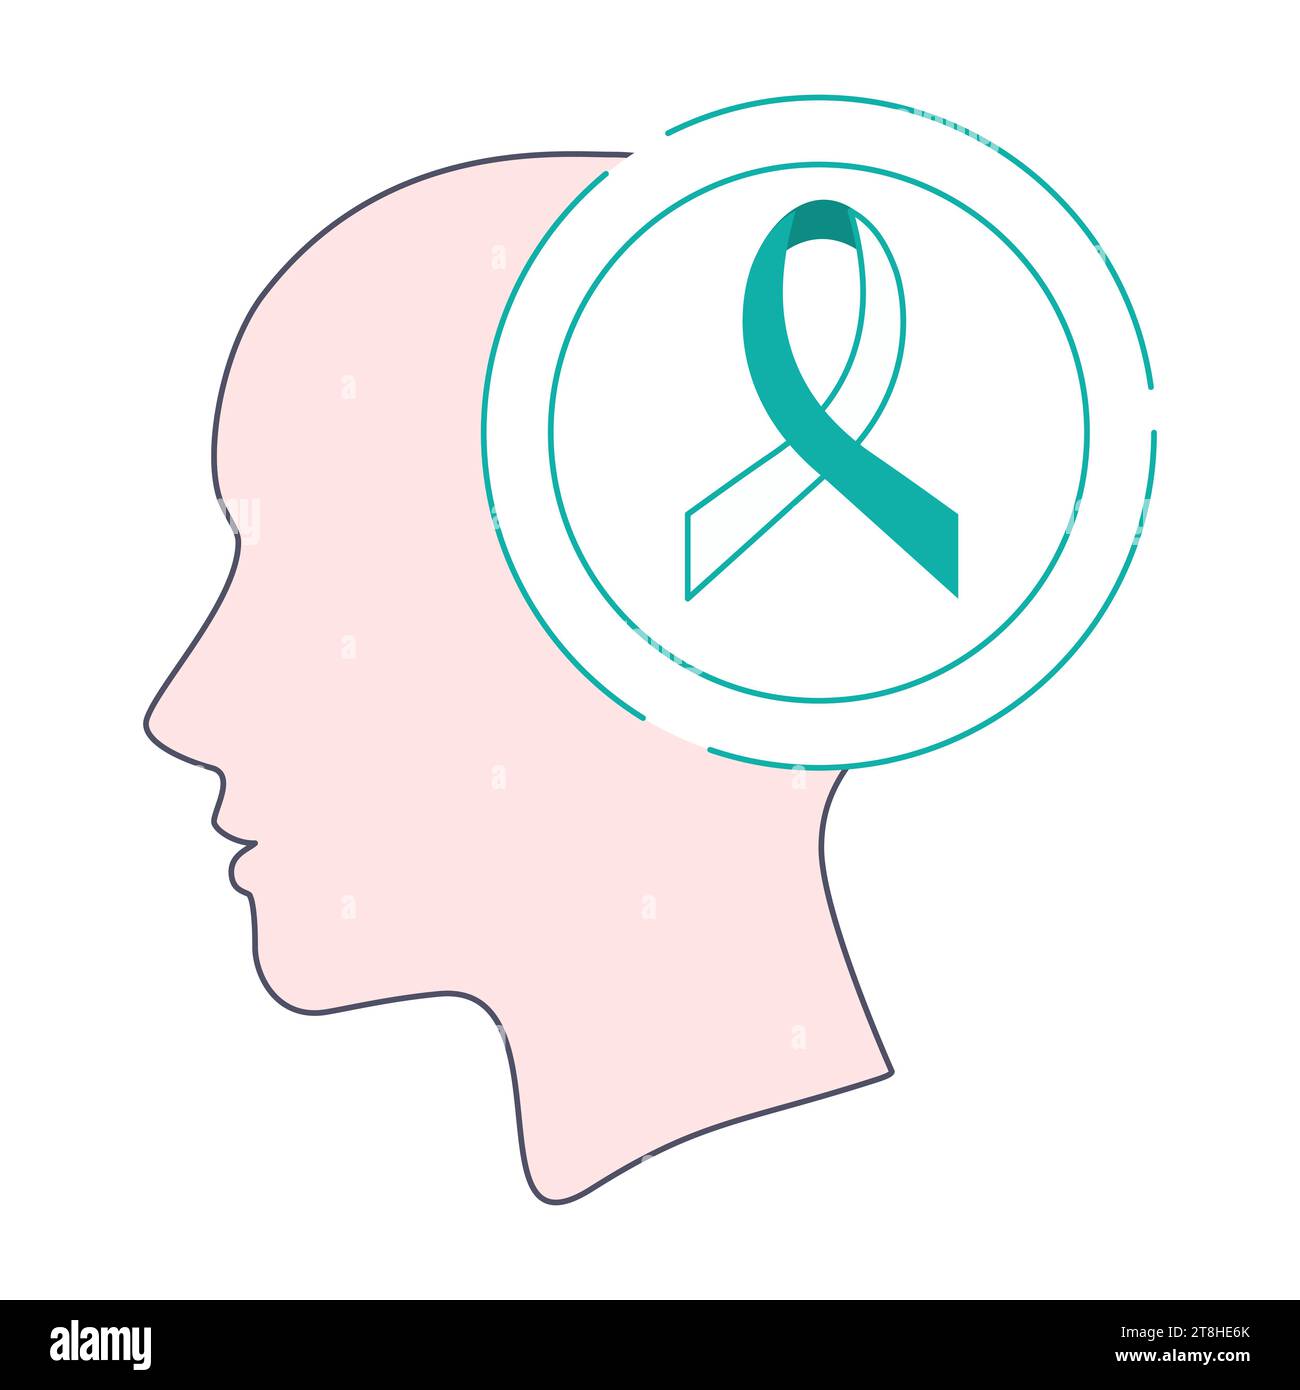 Teal and white awareness ribbon icon Stock Vector